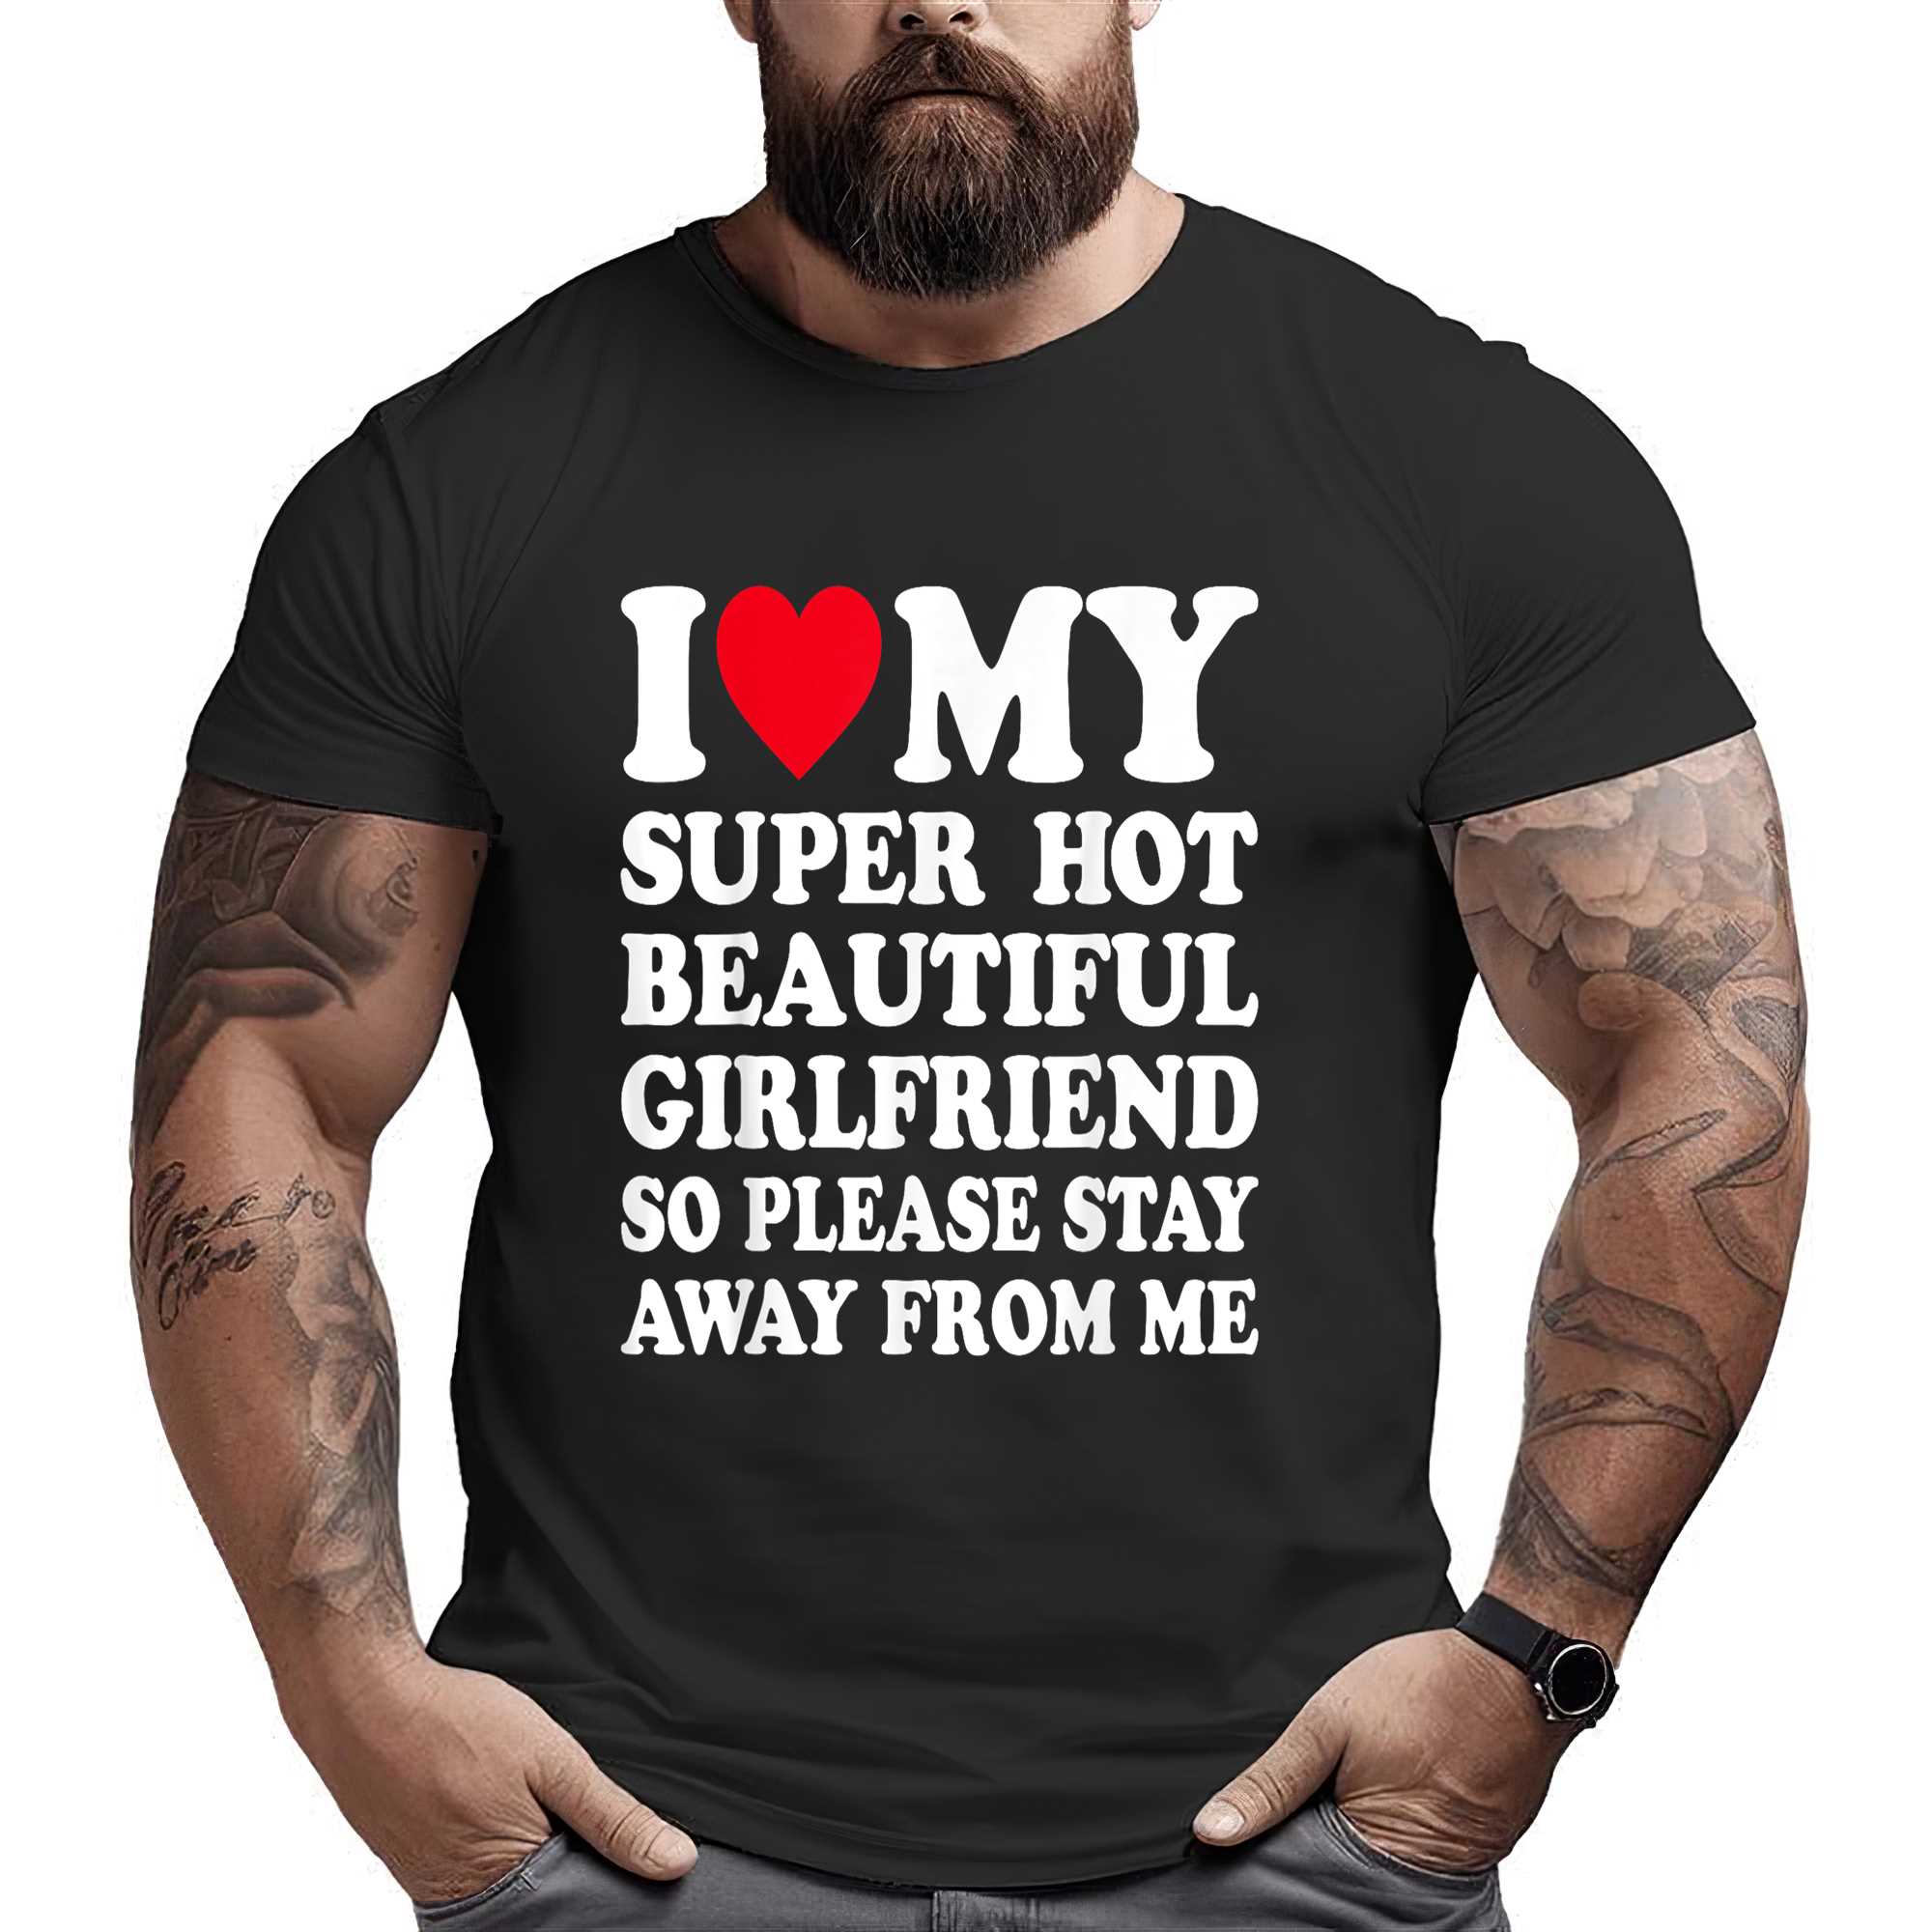 I Love My Super Hot Girlfriend So Please Stay Away From Me T-shirt